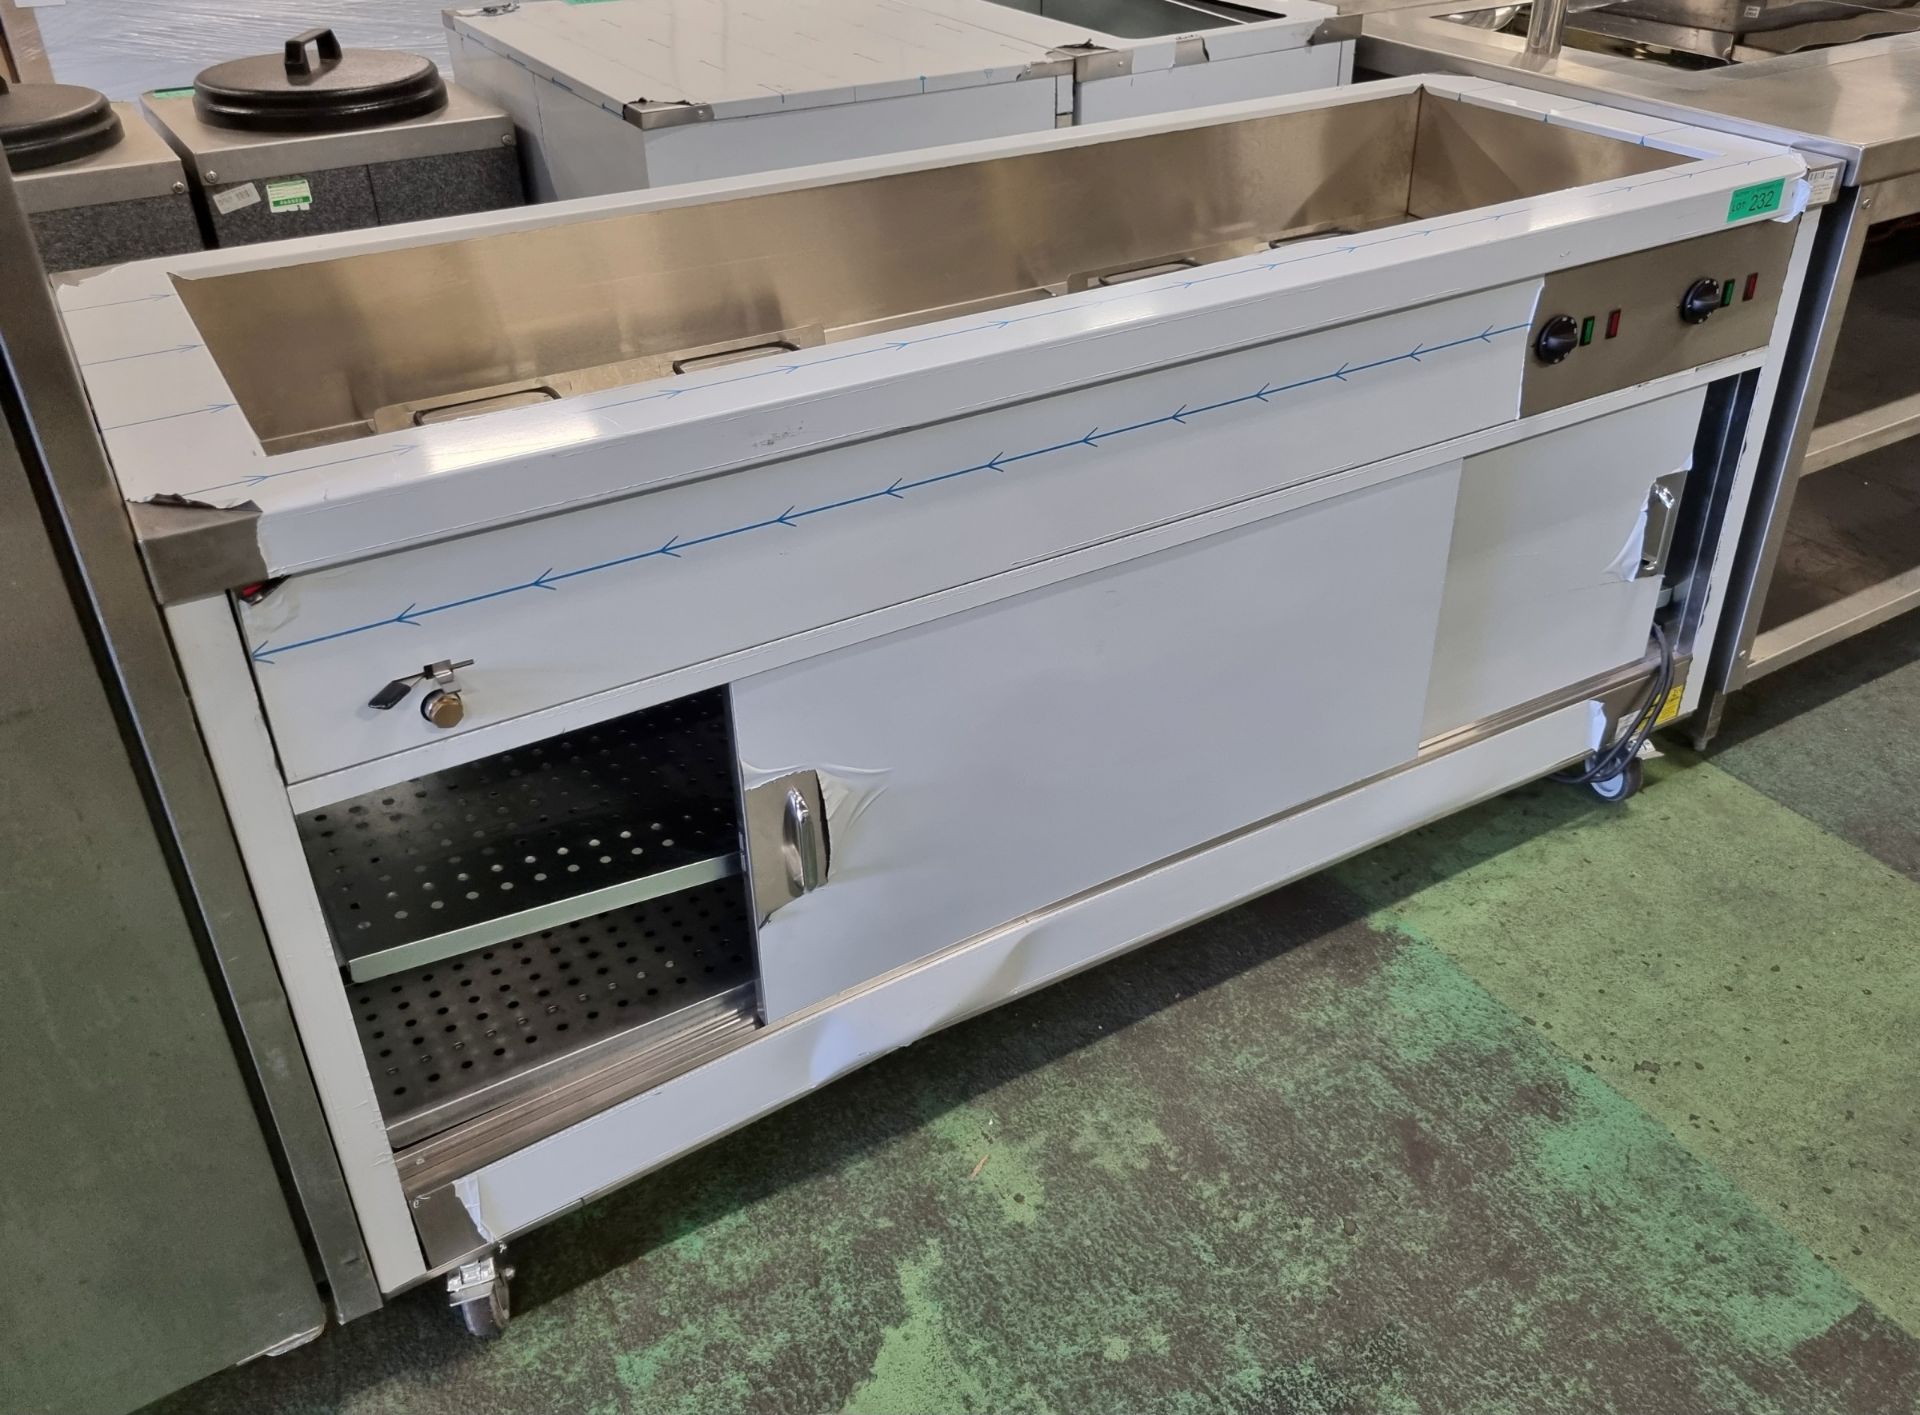 Parry HOT18BM hot cupboard with bain marie top - 180 x 65 x 90 - Image 3 of 6